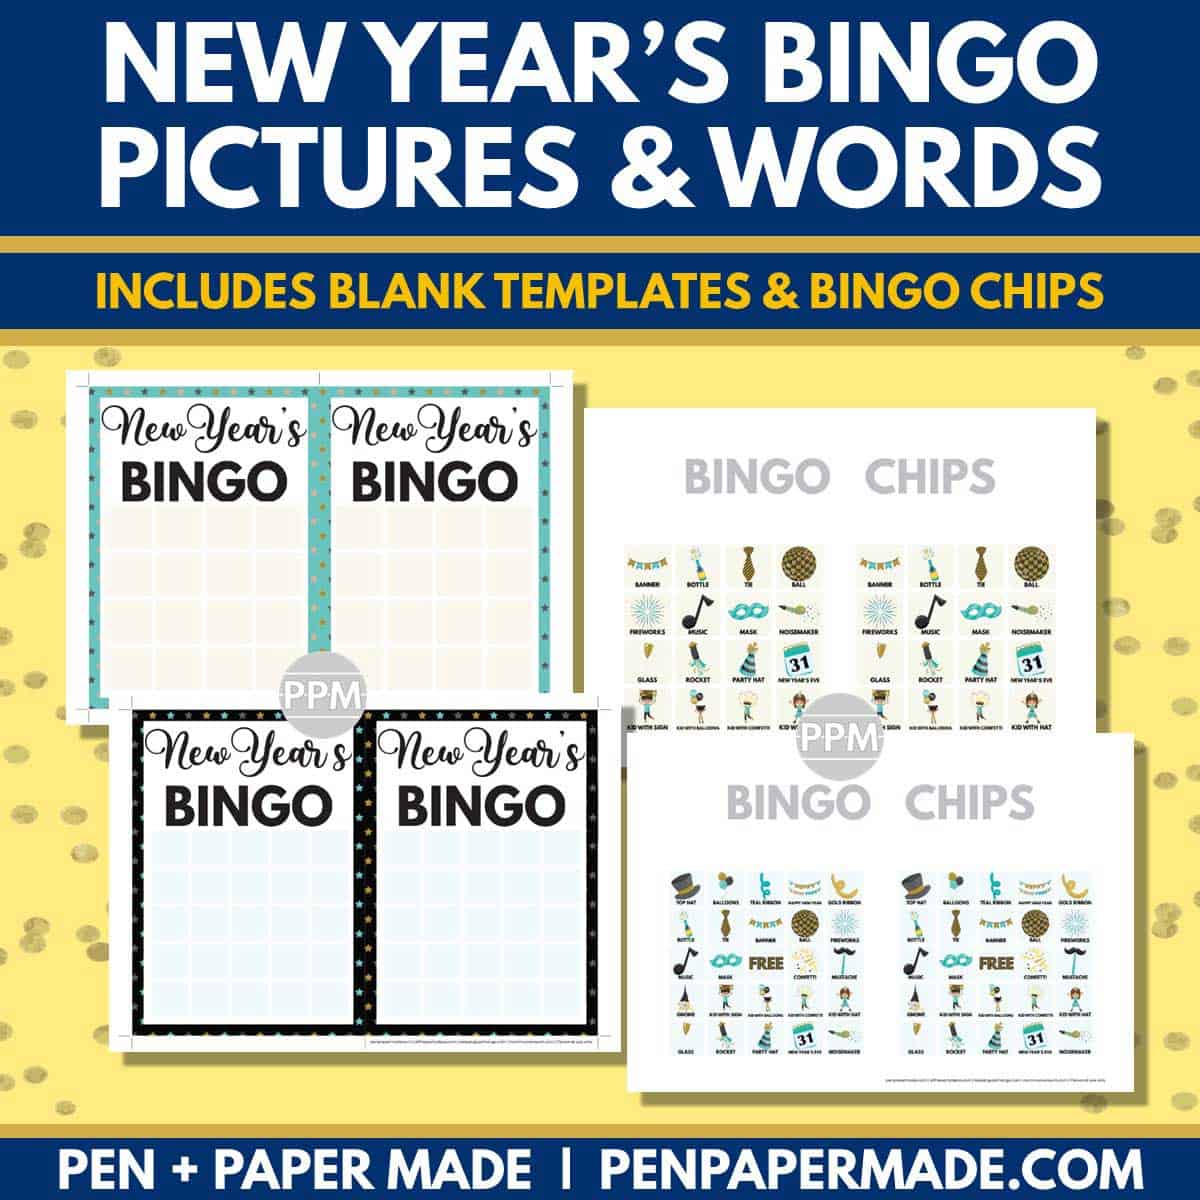 new year's day bingo card 5x5, 4x4 game chips, tokens, markers.